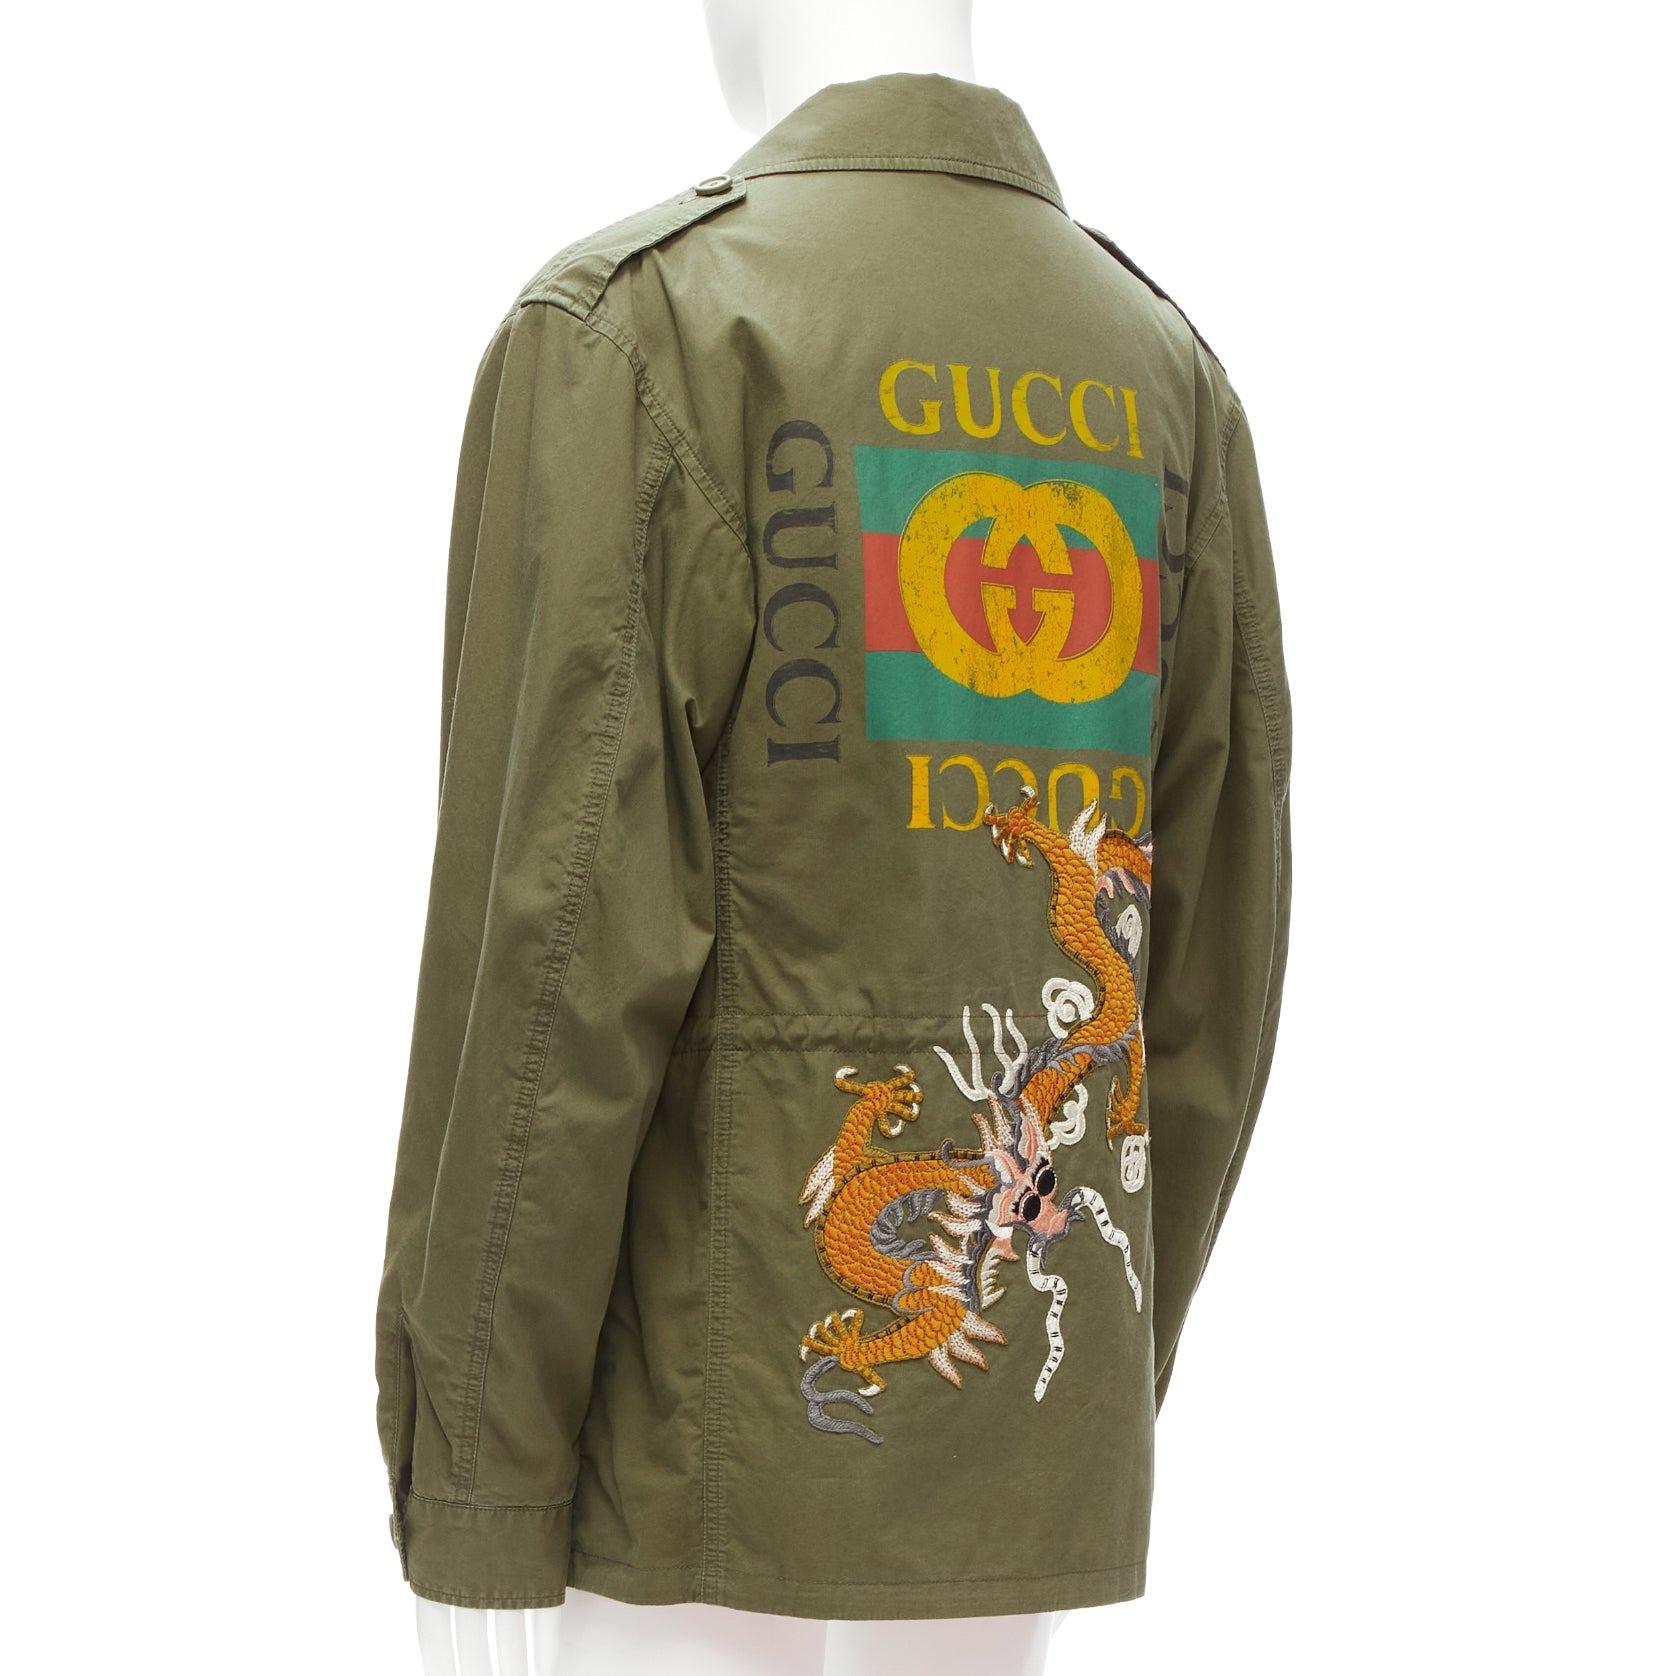 Men's GUCCI Alessandro Michele Vintage Logo dragon embroidery green field jacket IT50